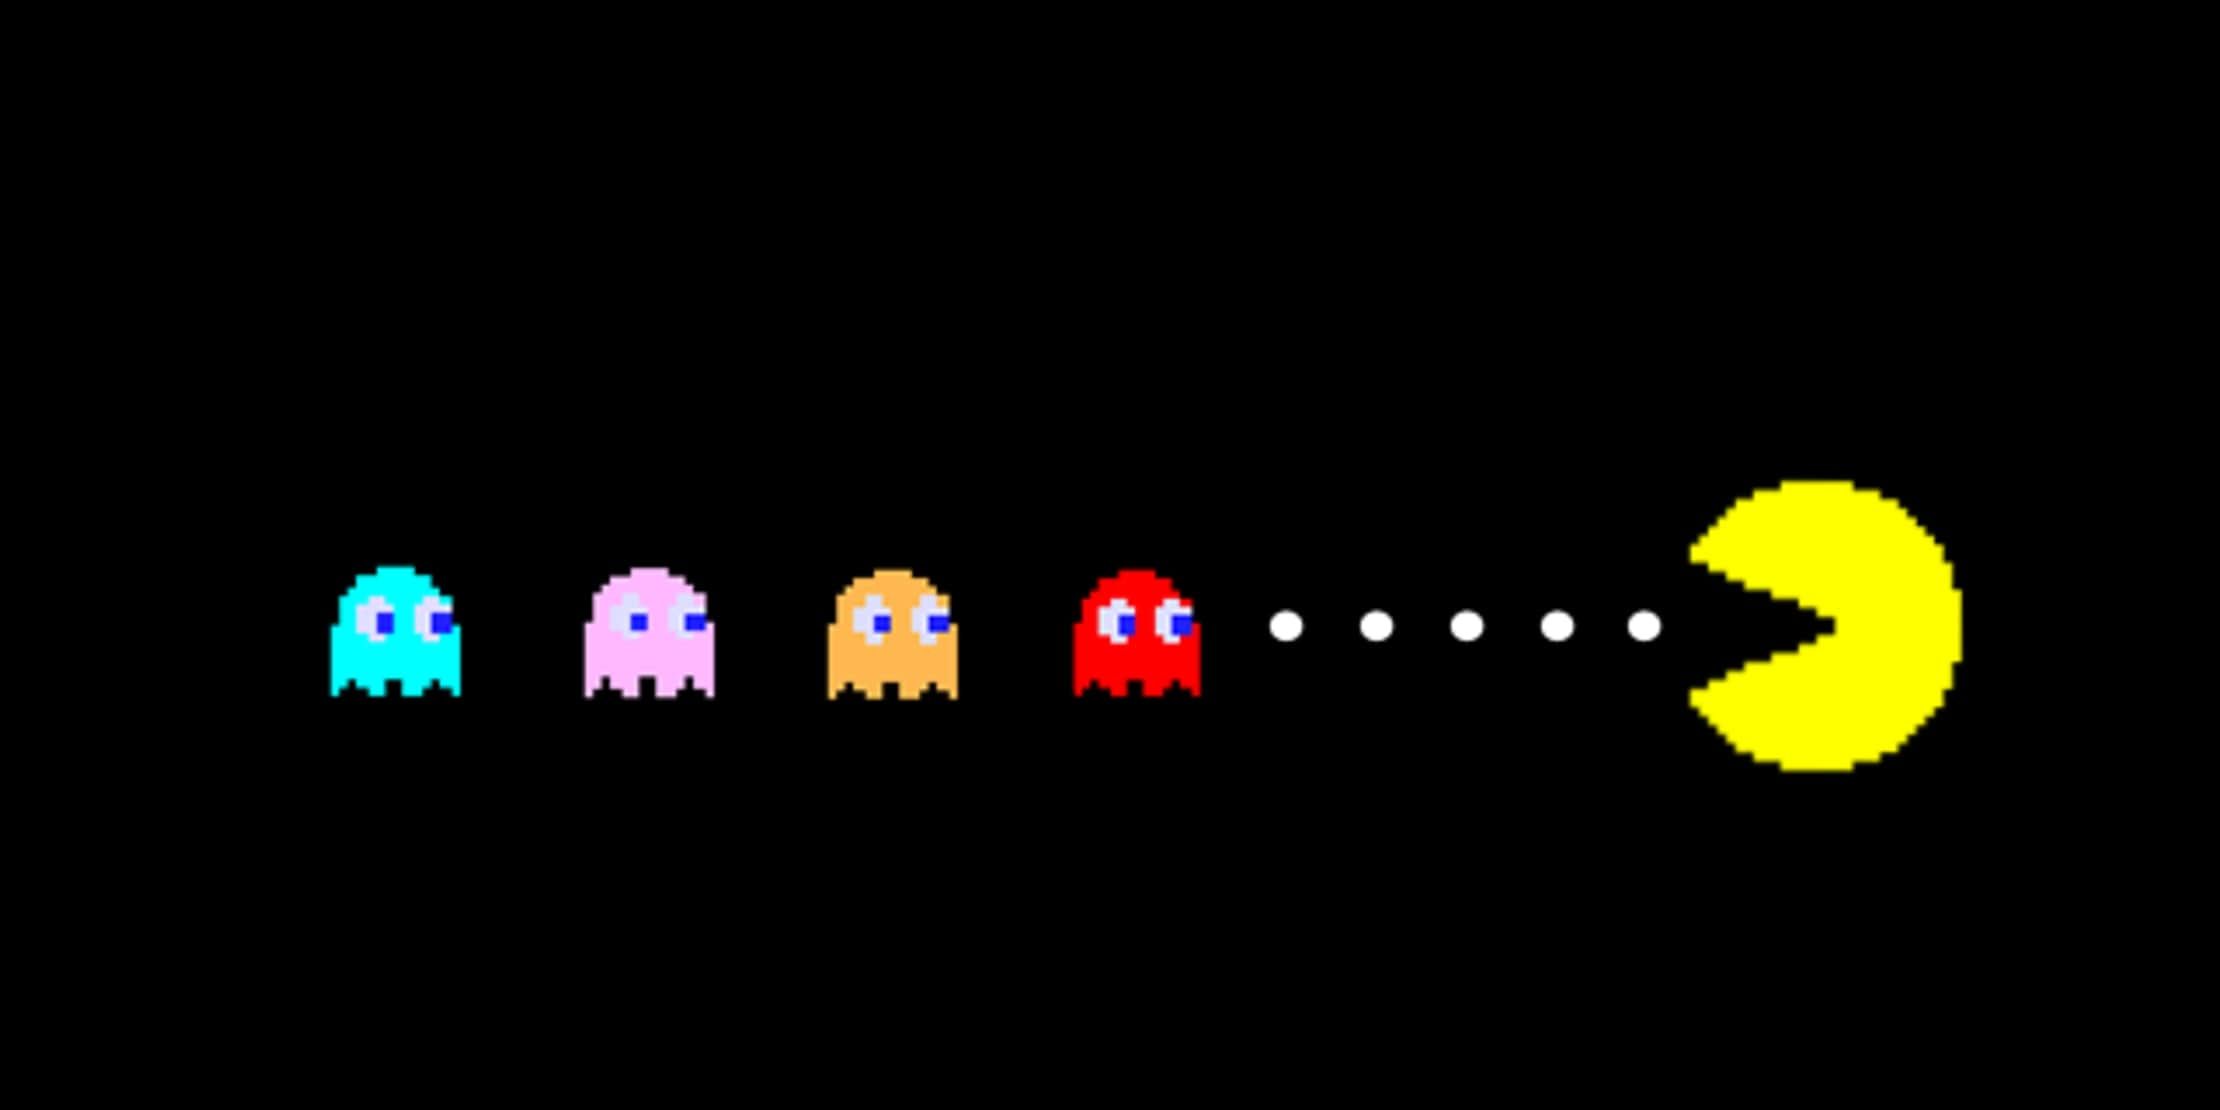 Pac Man eating the ghosts